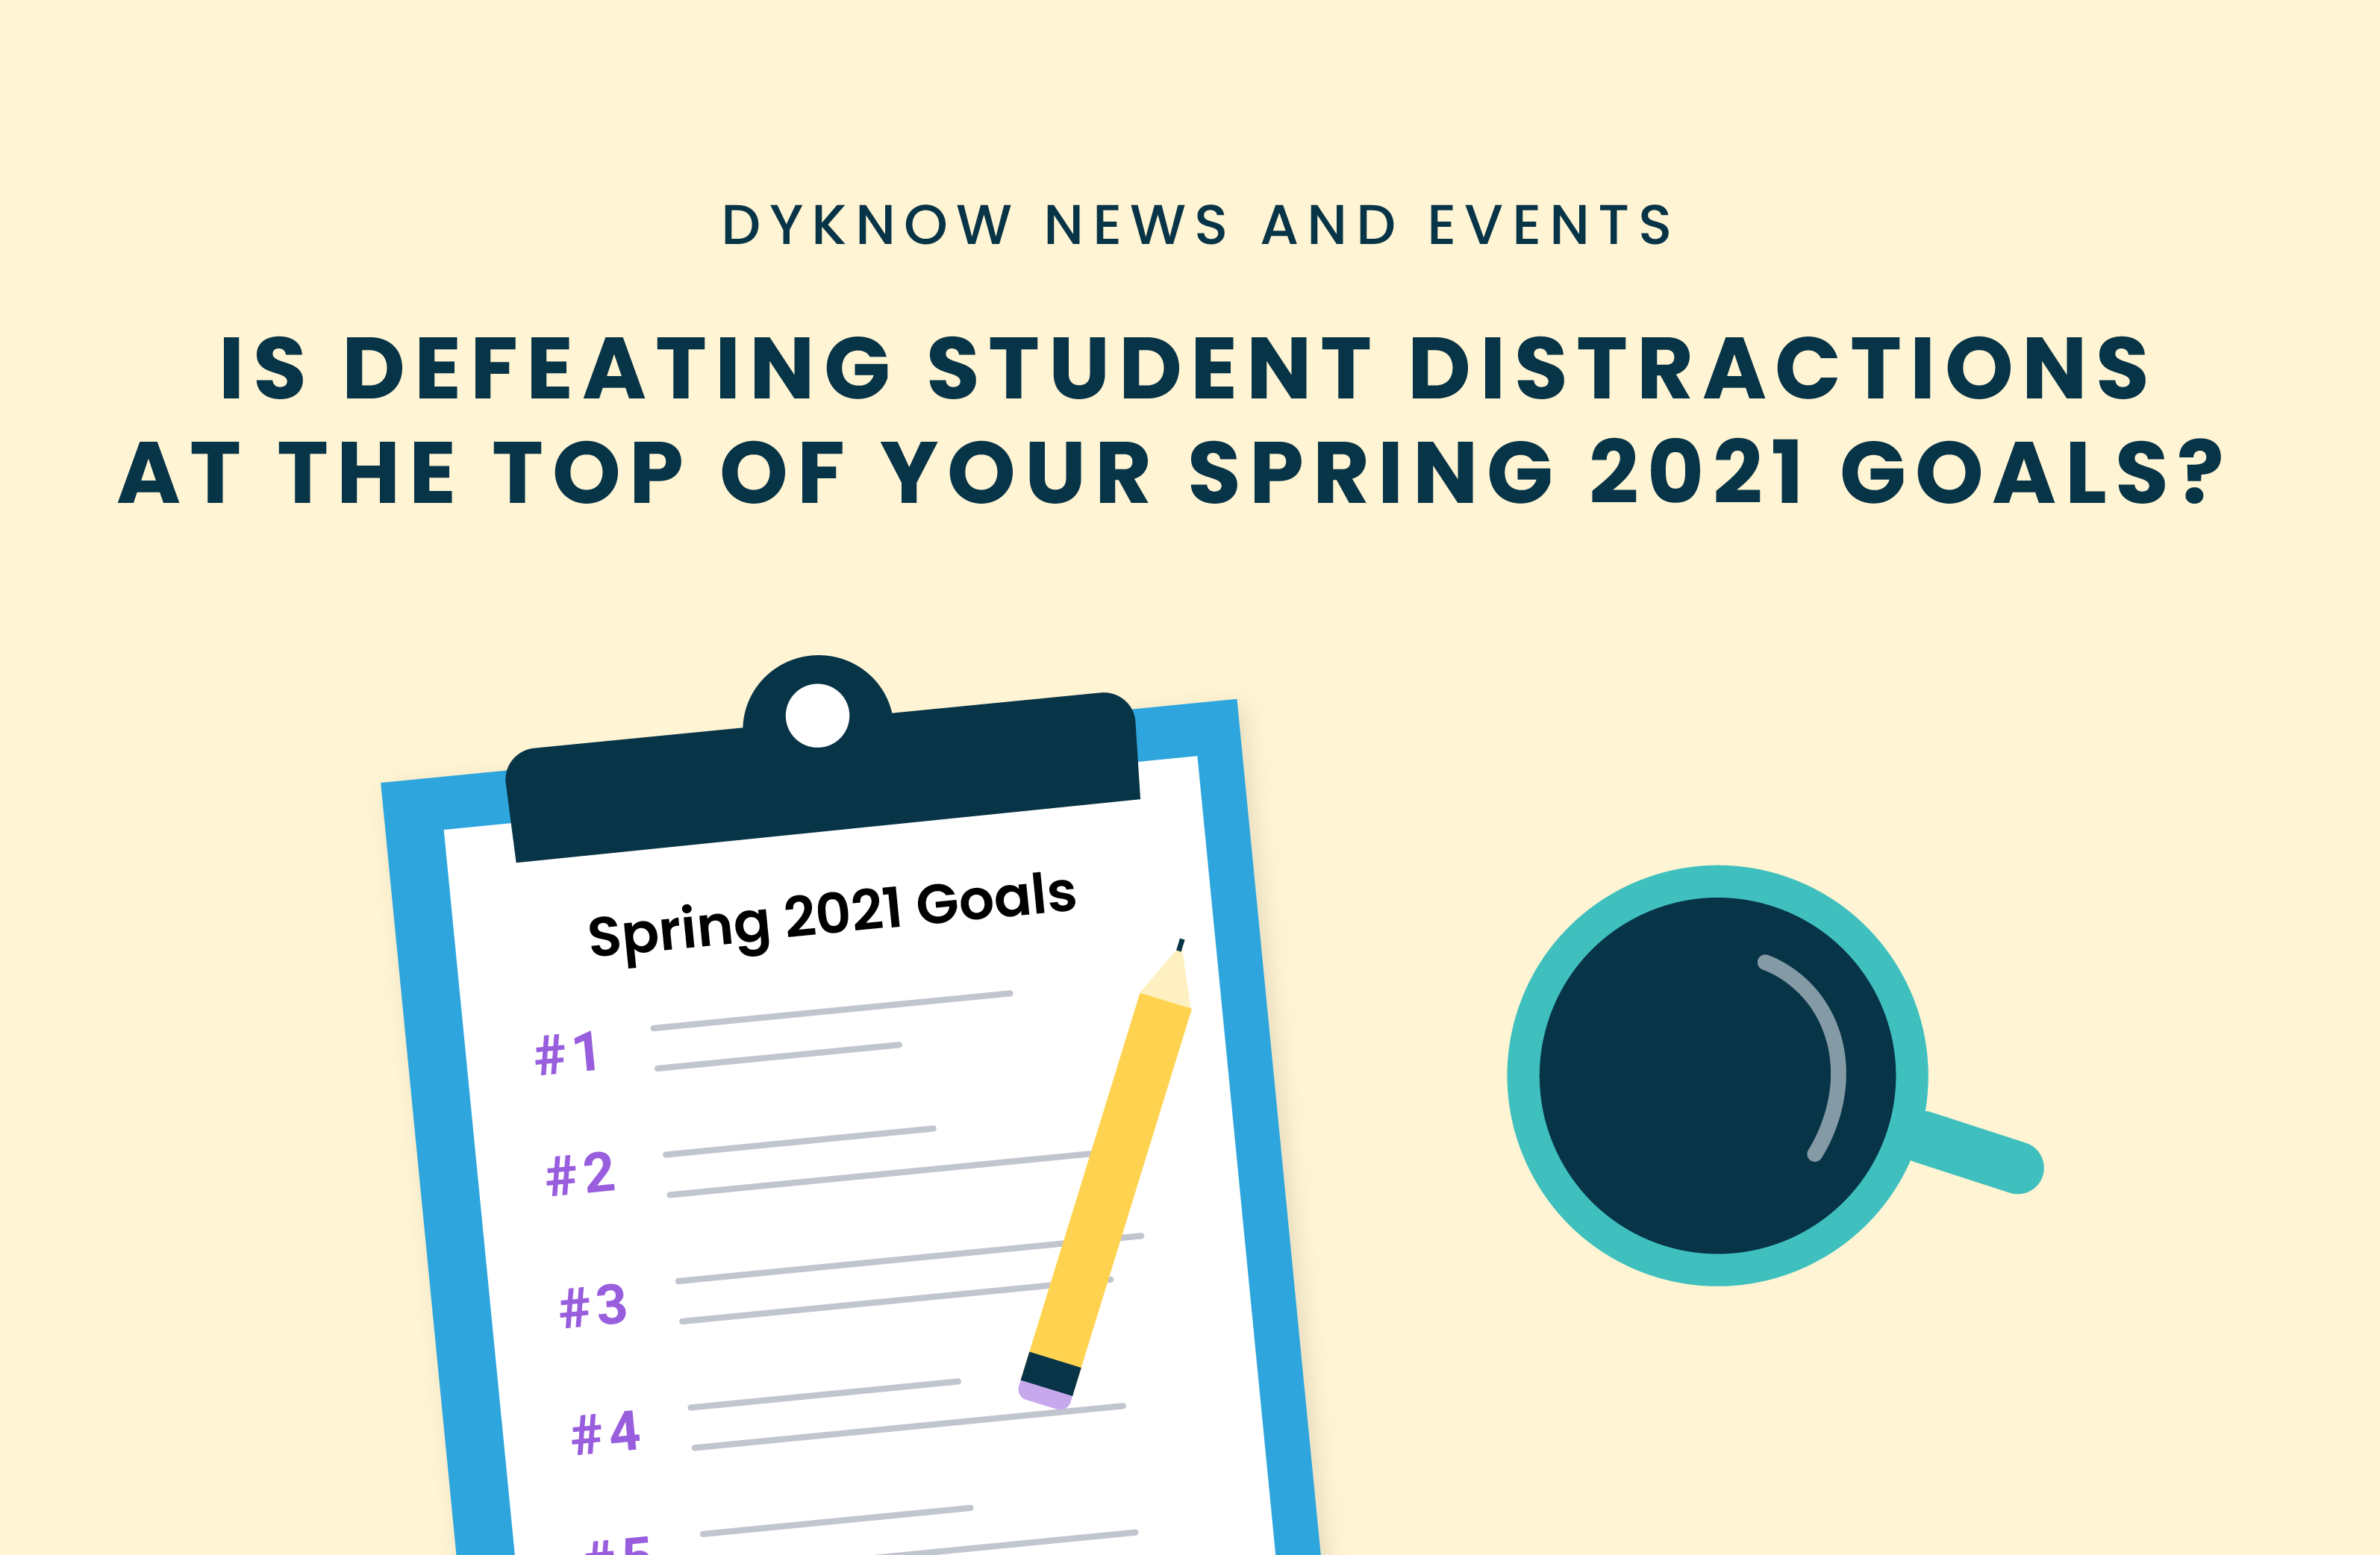 defeat distractions spring 2021 goals